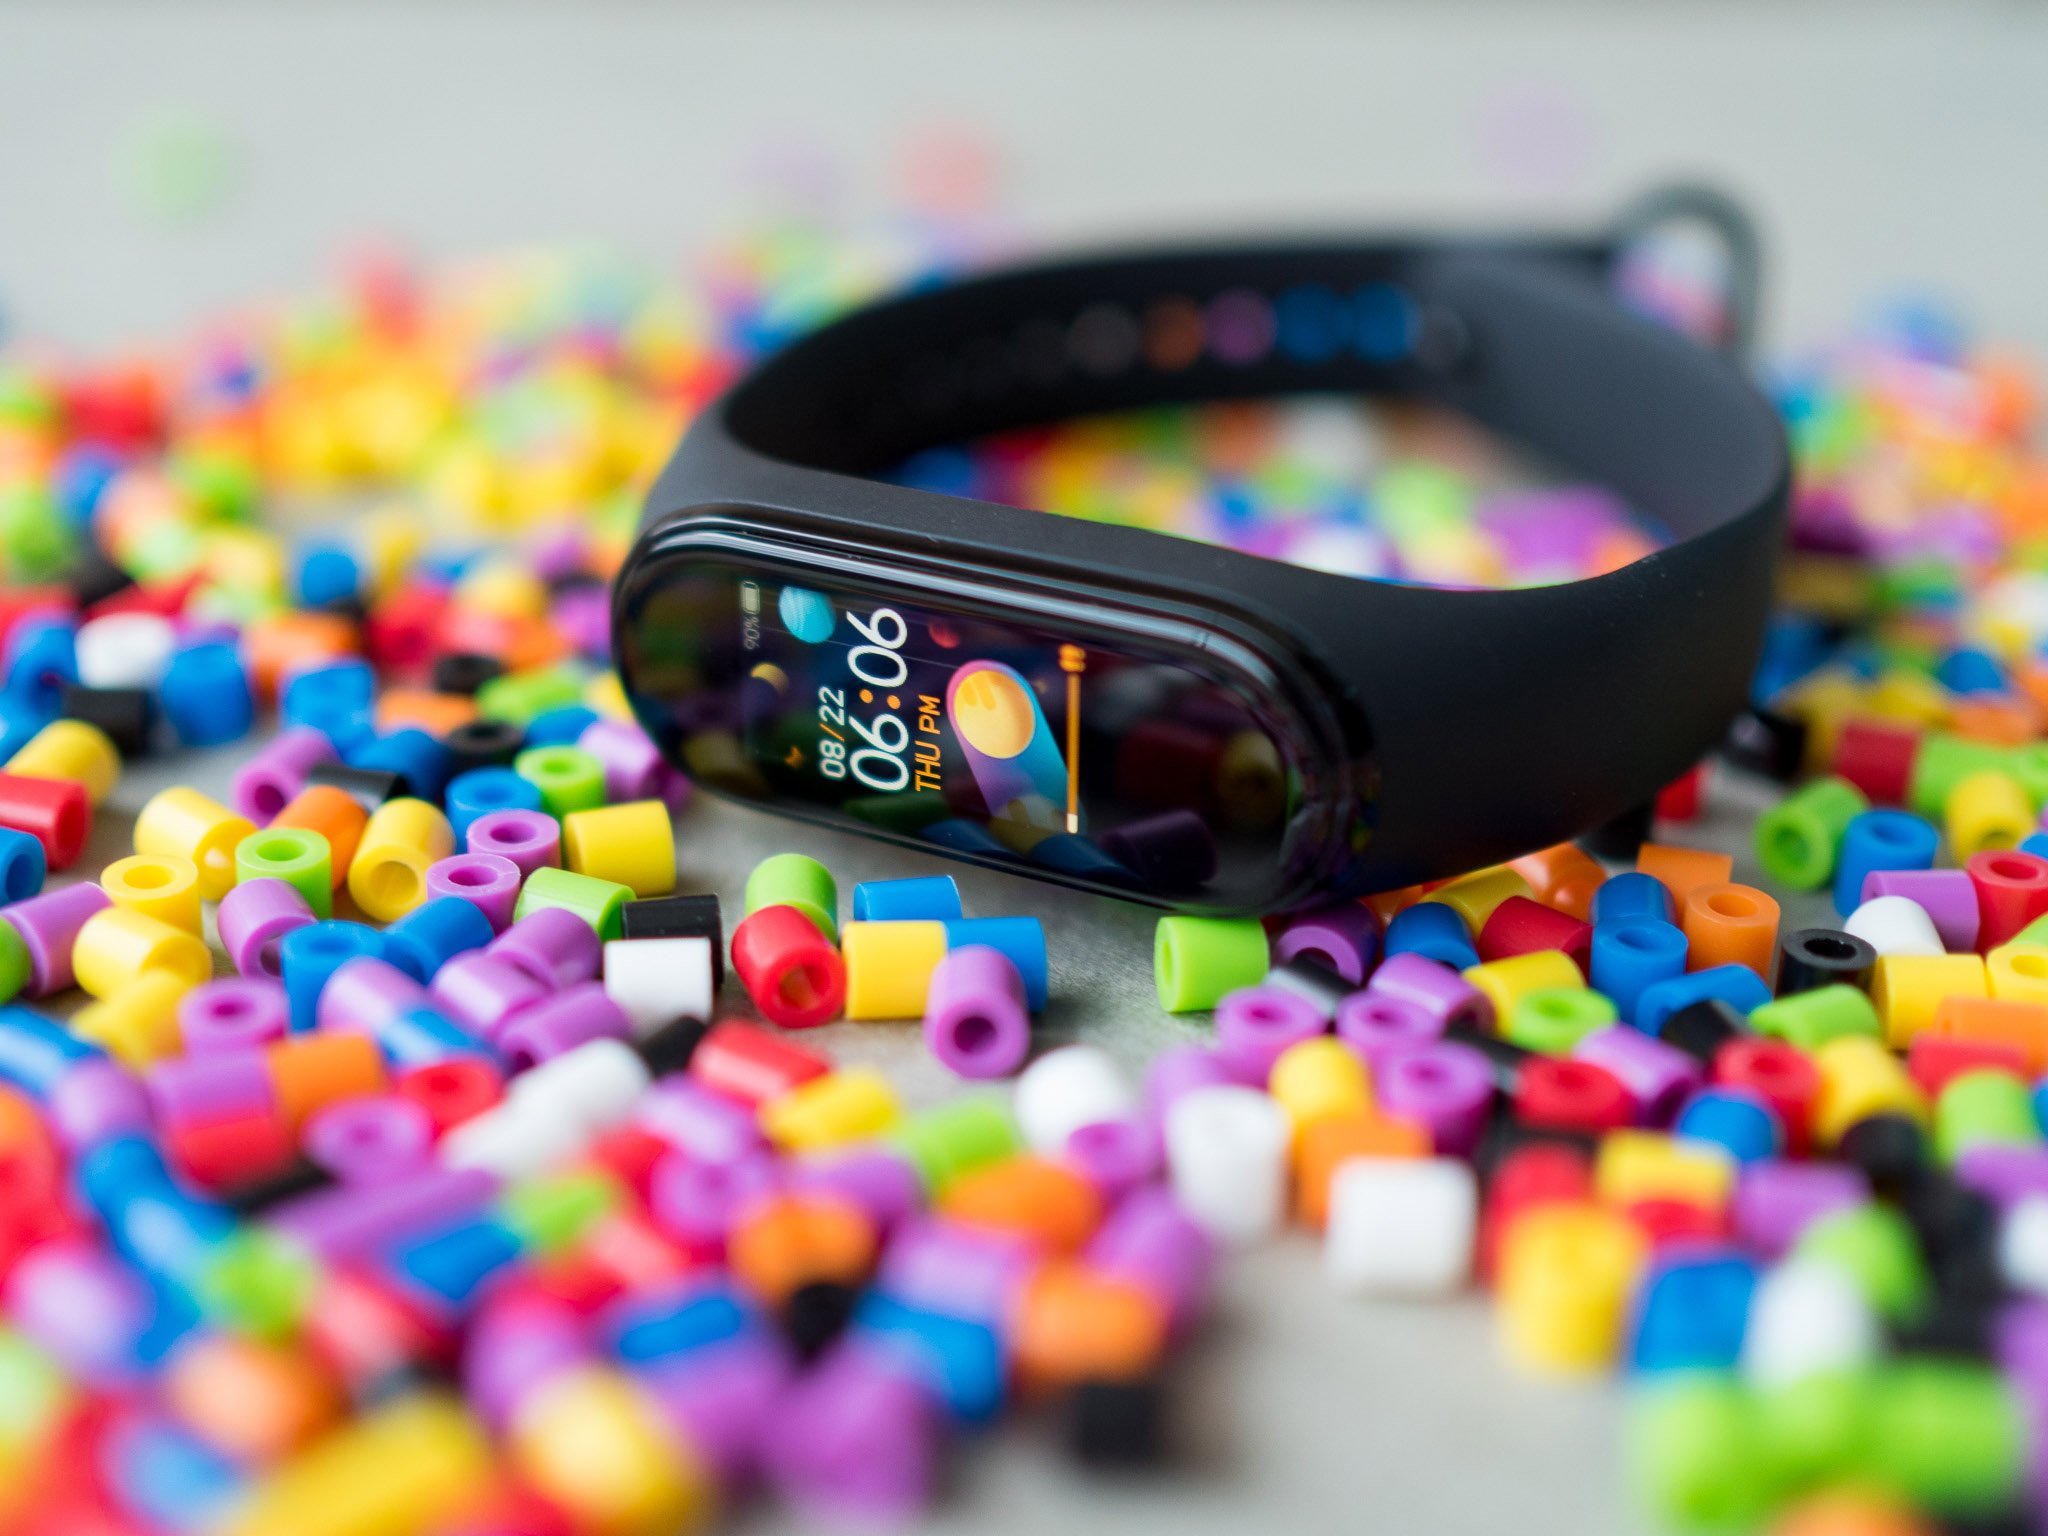 Xiaomi Mi Band 5 Vs Mi Band 4 What S The Difference And Which Should You Buy Android Central